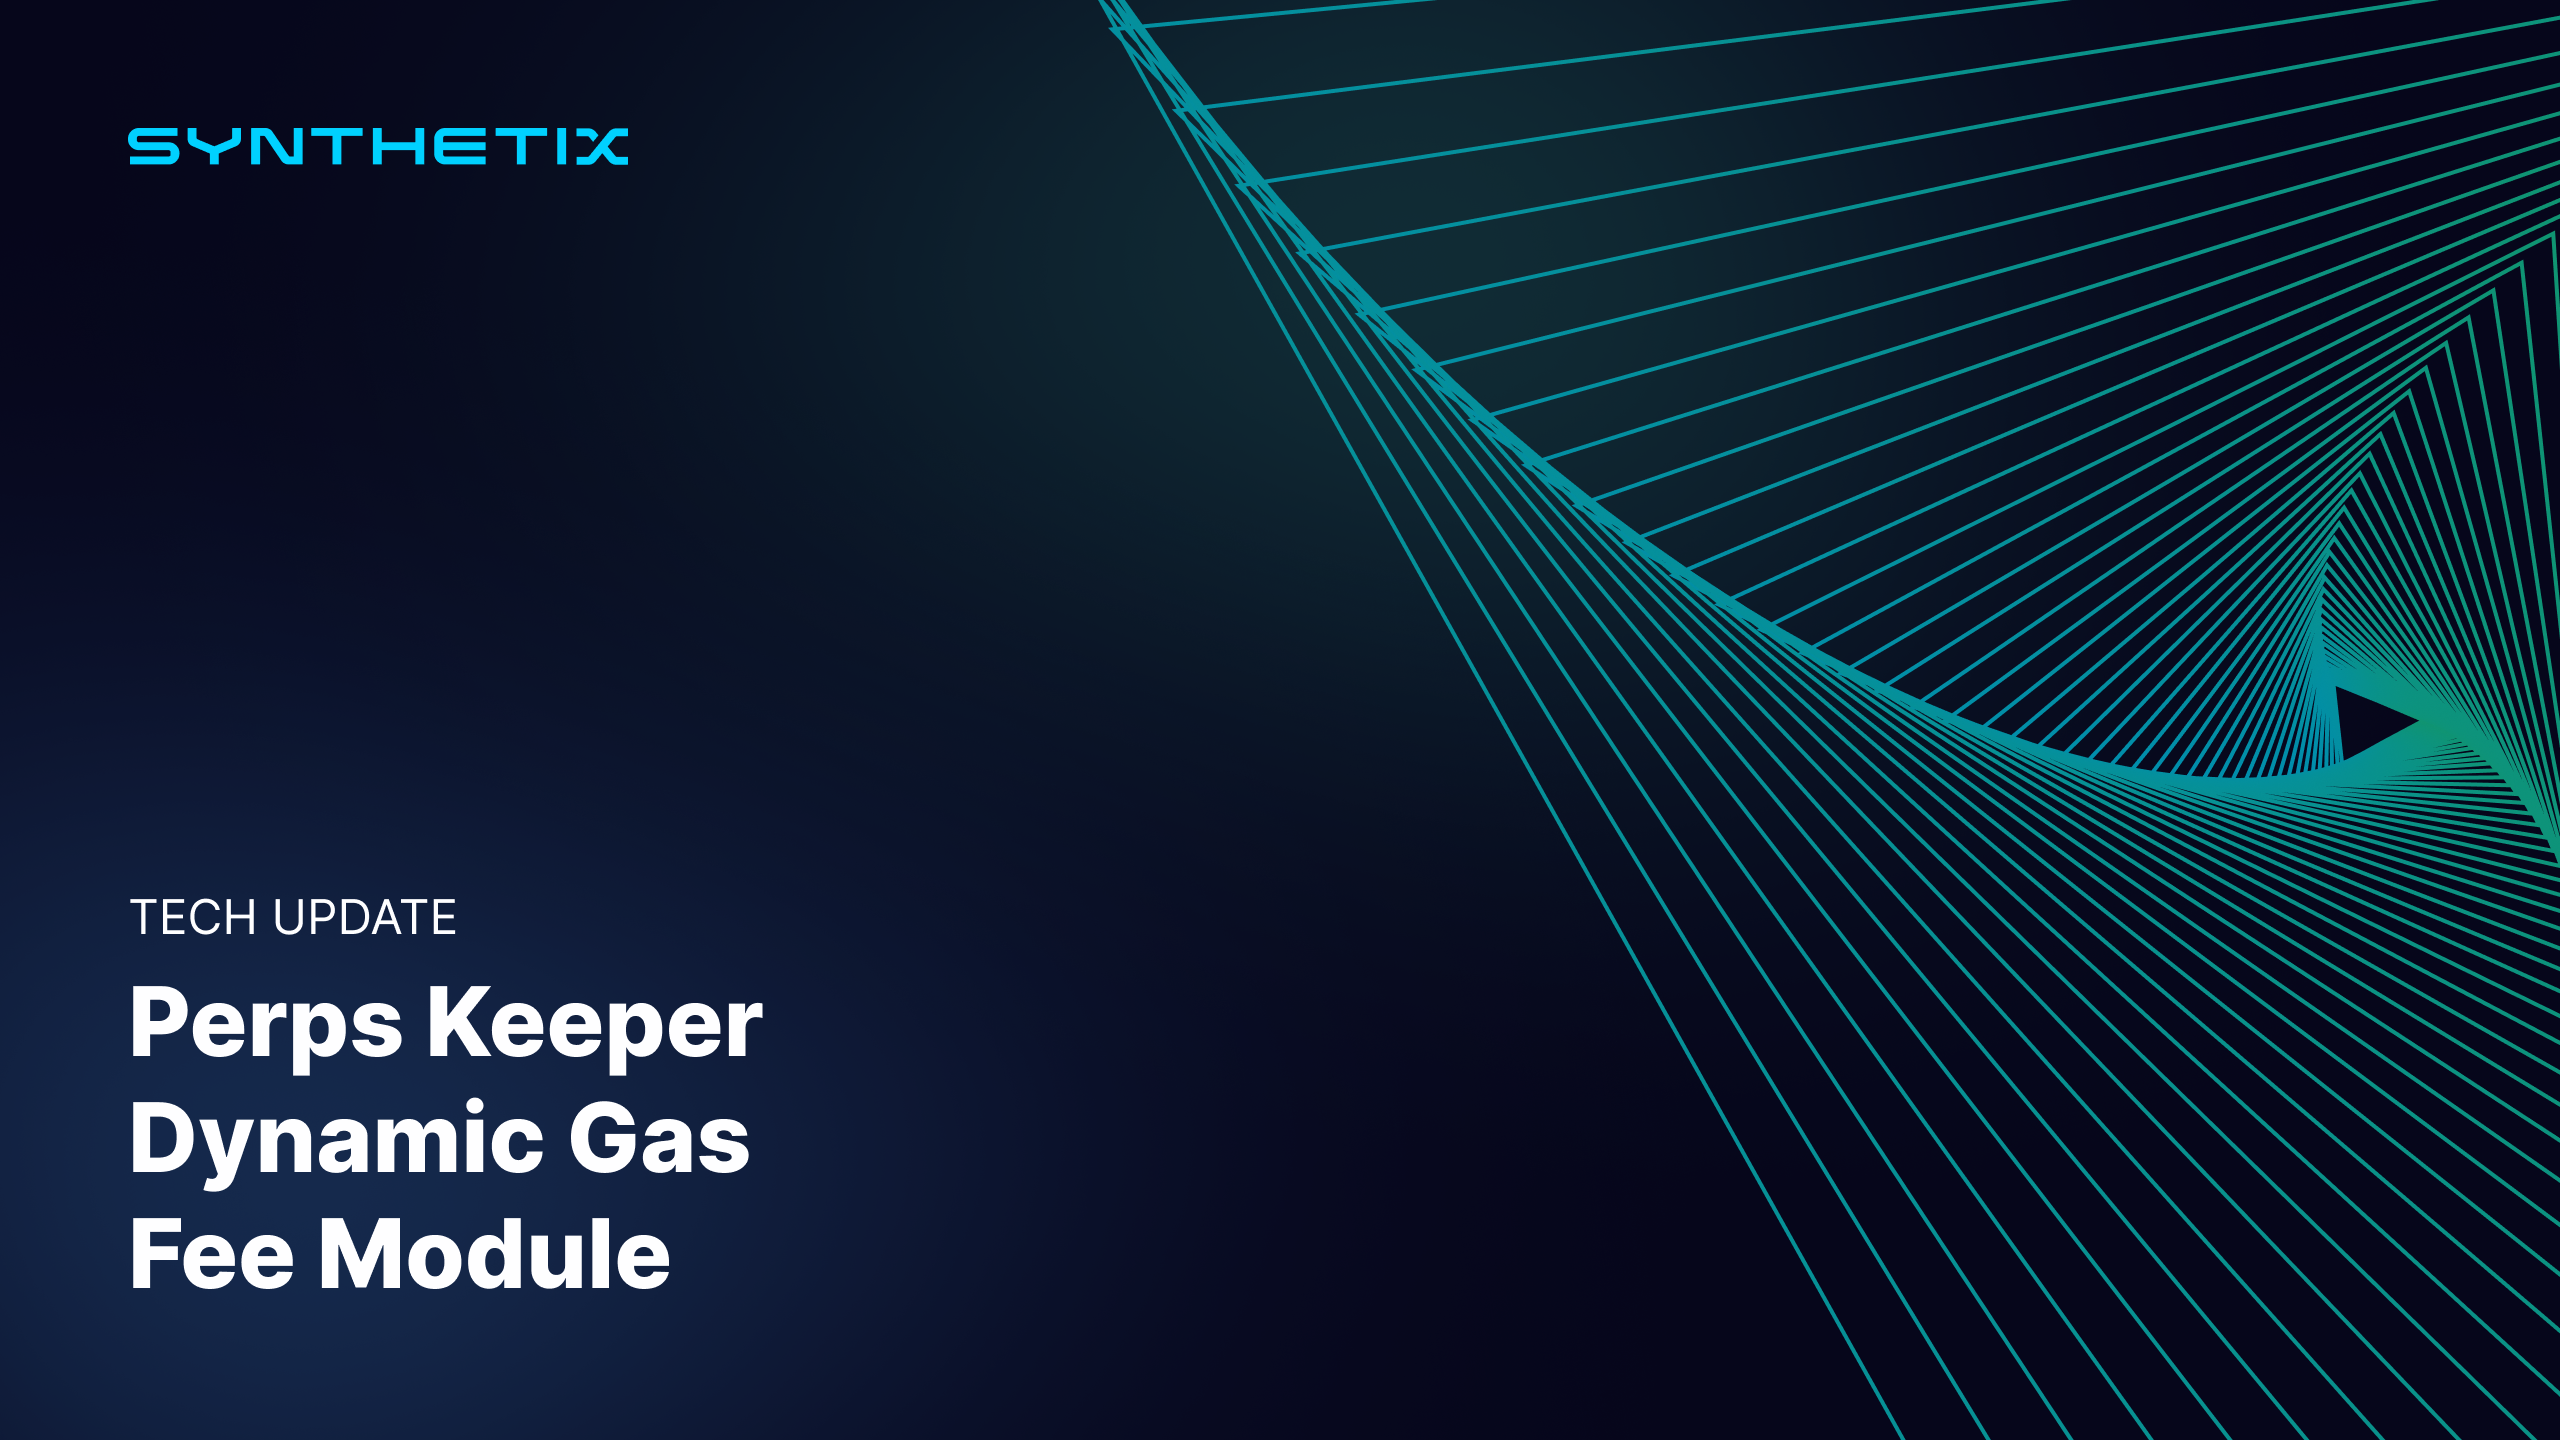 Improving Keeper Rewards on Synthetix Perps: Introducing the Dynamic Gas Fee Module